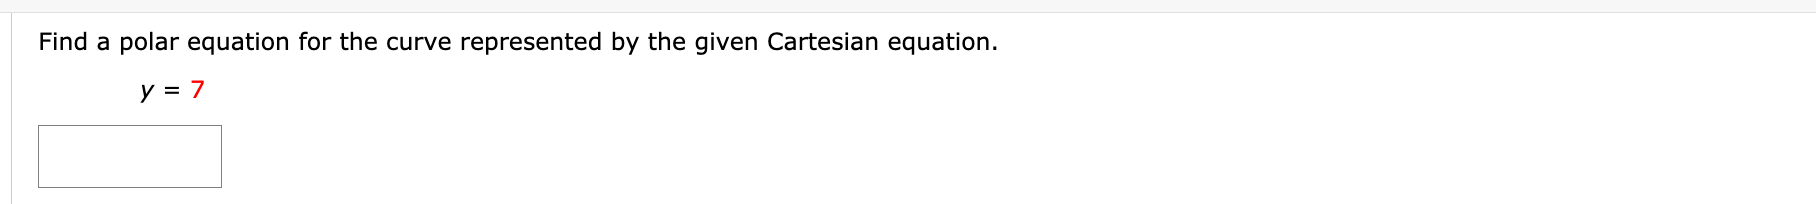 Find a polar equation for the curve represented by the given Cartesian equation
y = 7
